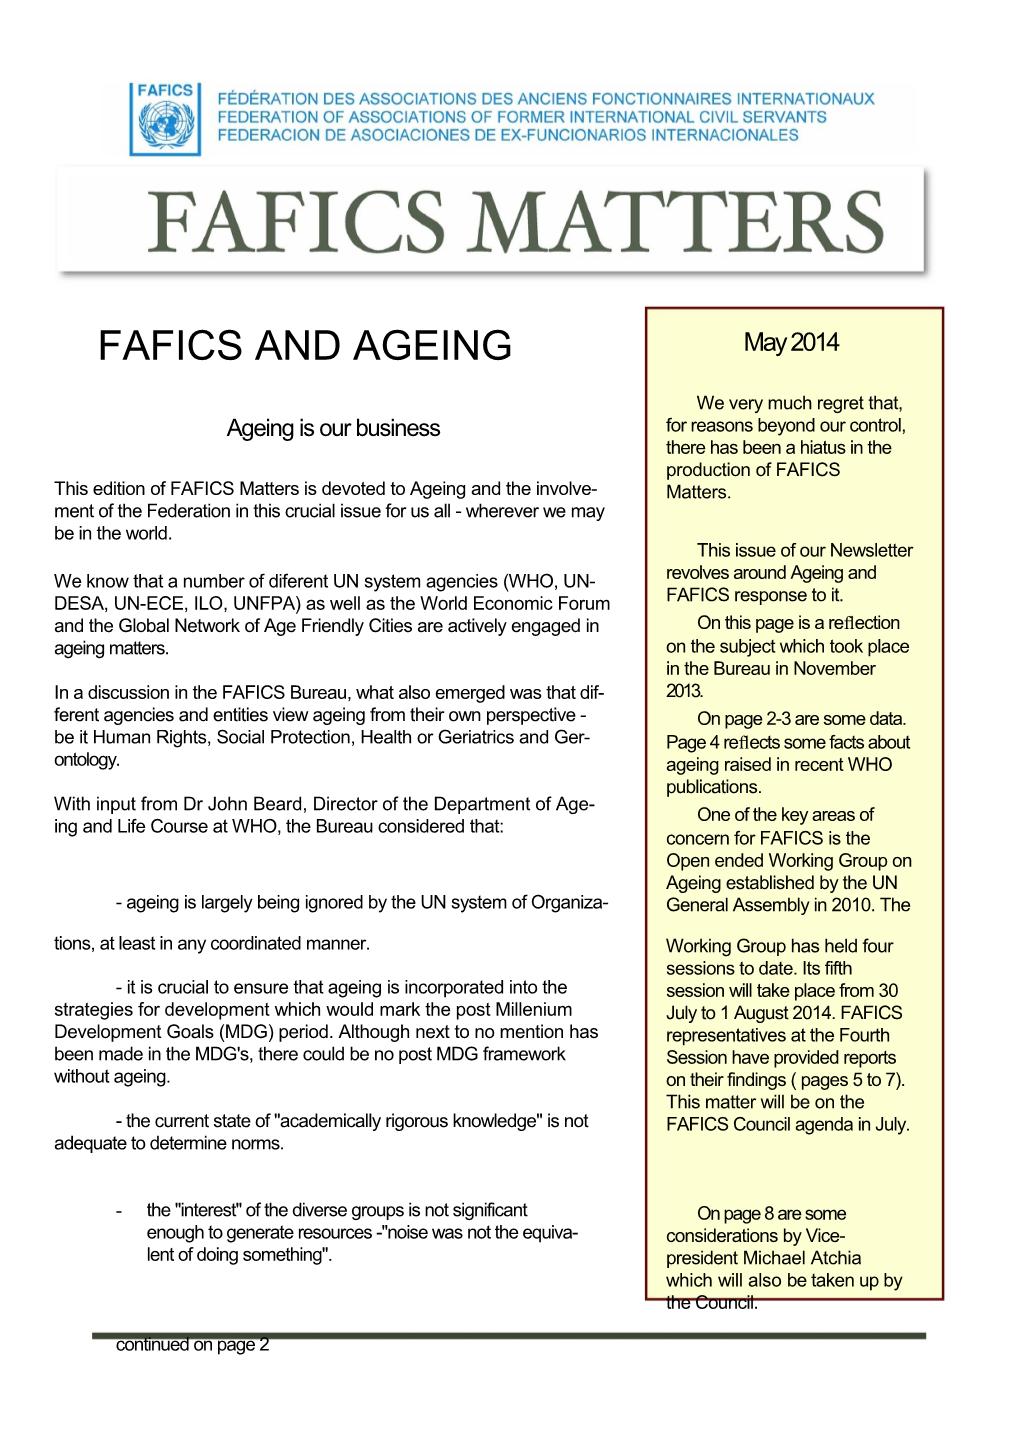 Fafics and Ageing